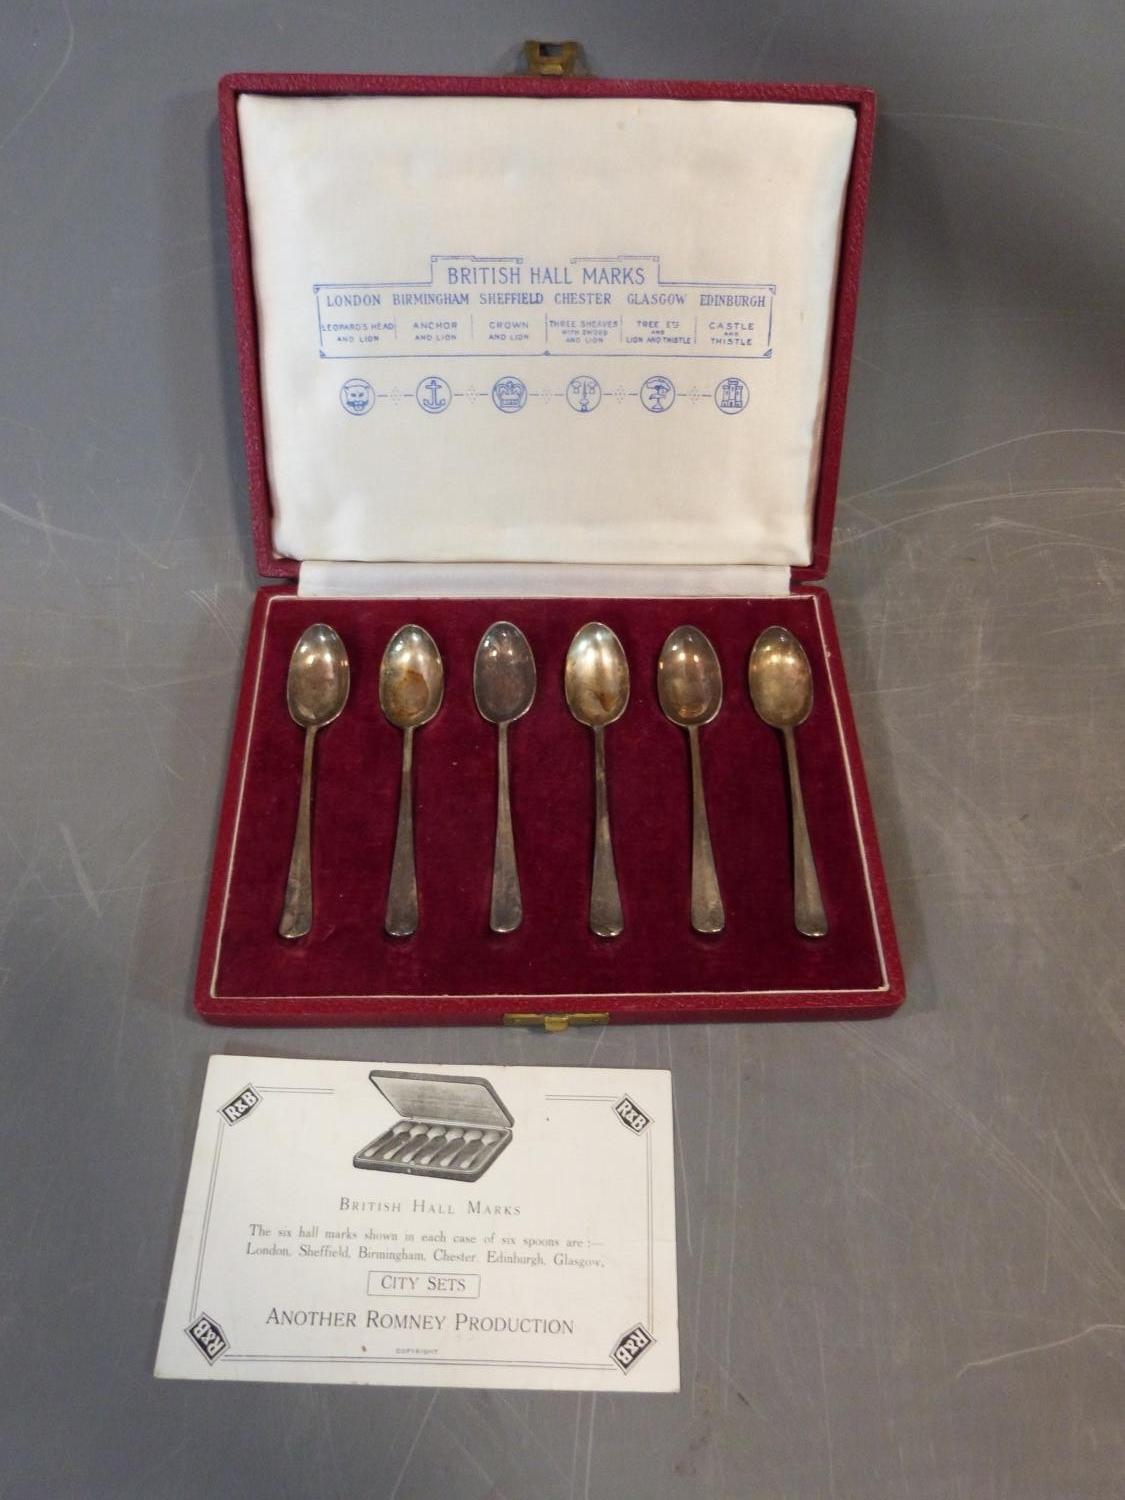 A cased set of British Hallmark silver spoons, each with a different town assay Mark, comes with